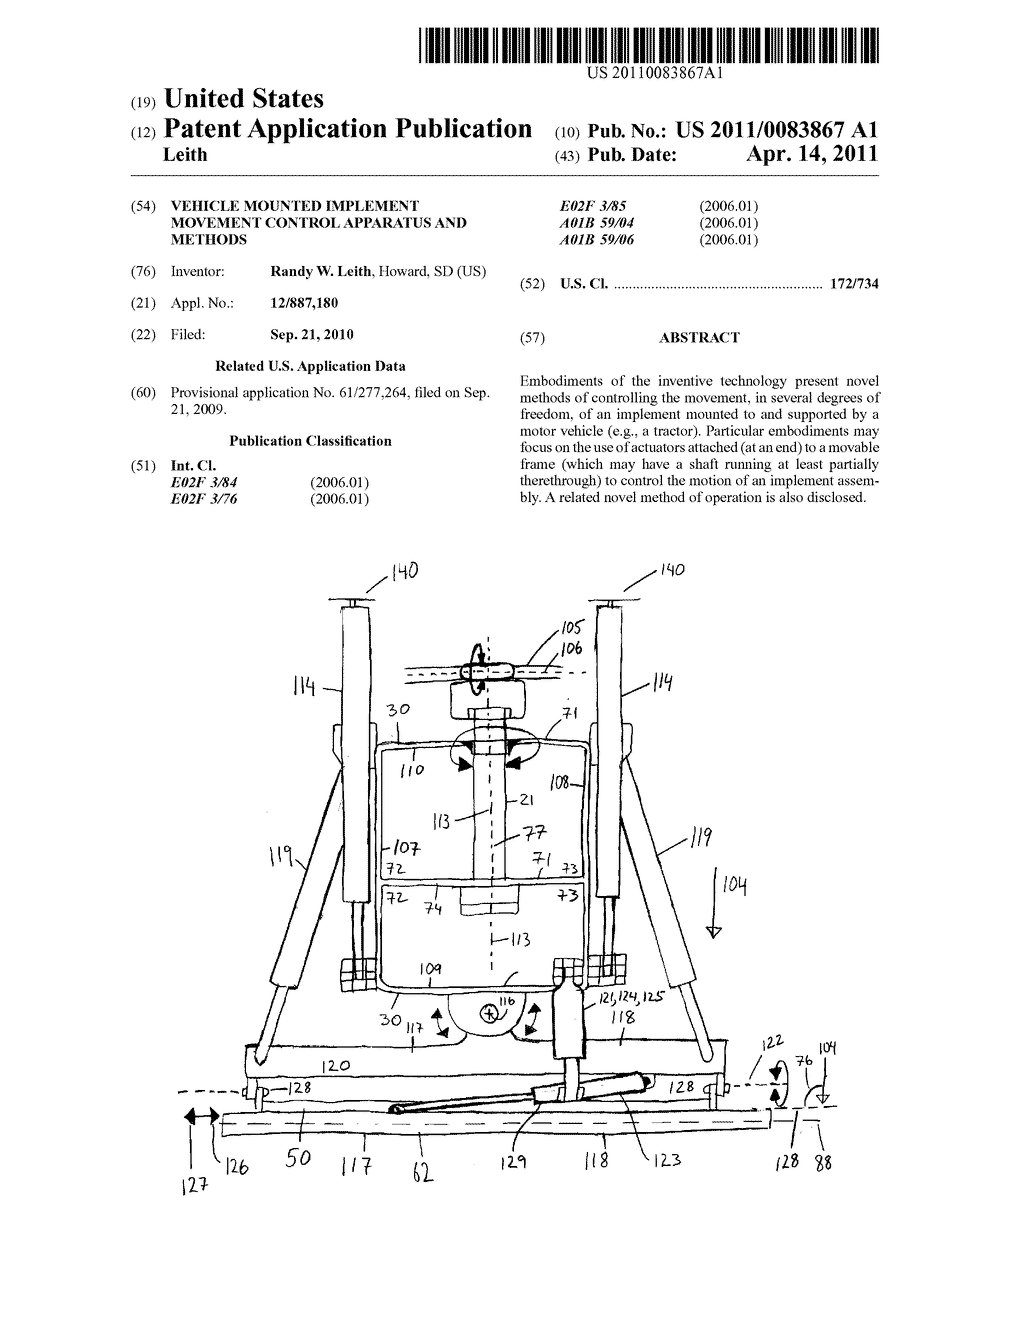 Vehicle Mounted Implement Movement Control Apparatus and Methods - diagram, schematic, and image 01